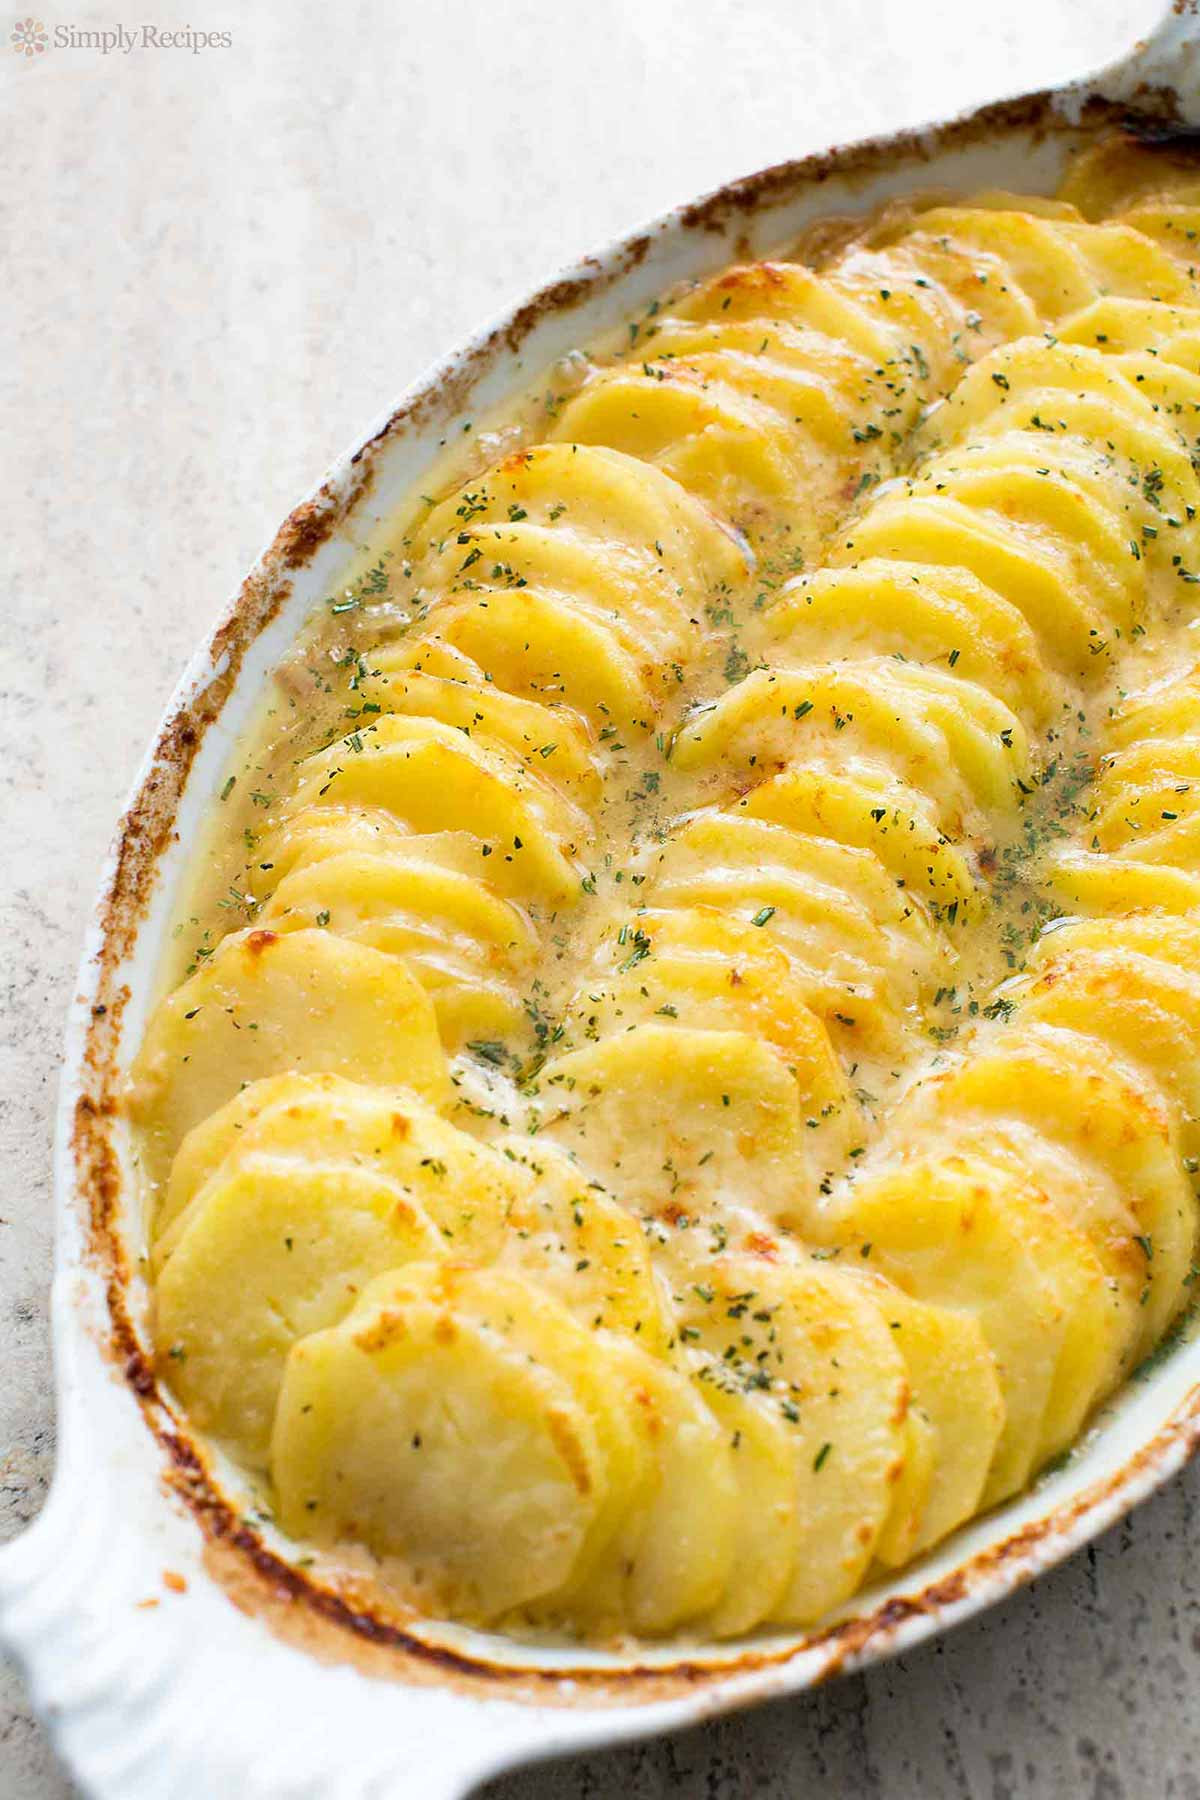 How To Make Scalloped Potatoes
 Scalloped Potatoes with Caramelized ions and Gruyere